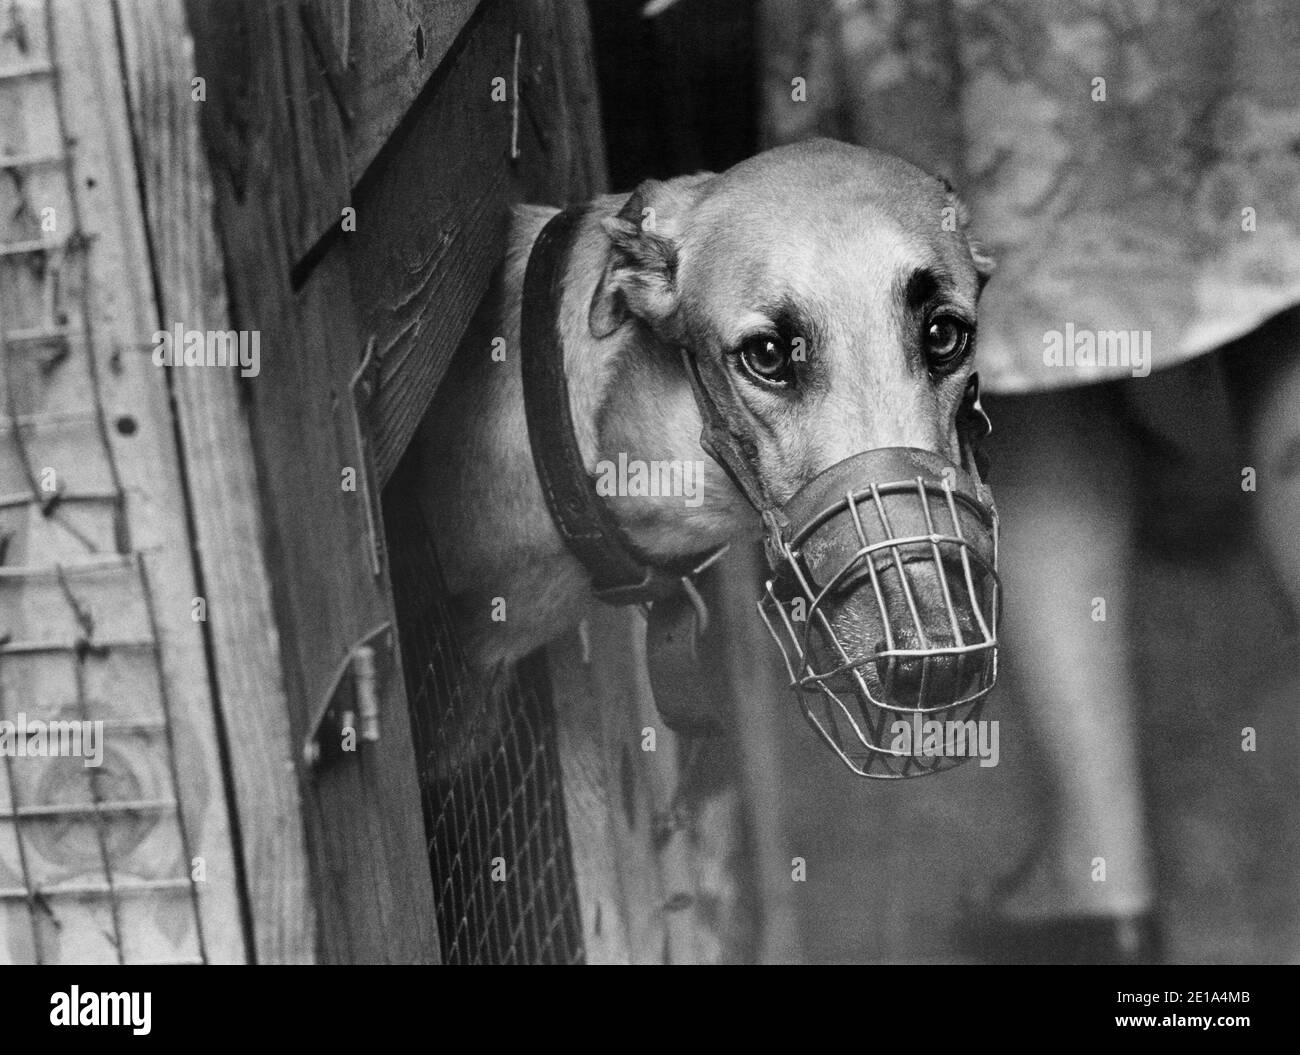 Racing greyhound looks out from his kennel at greyhound breeders facility, South Florida, in the 1960's.  The dog racing business has just been banned in Florida, after close to a century of dog racing history in the state. Stock Photo